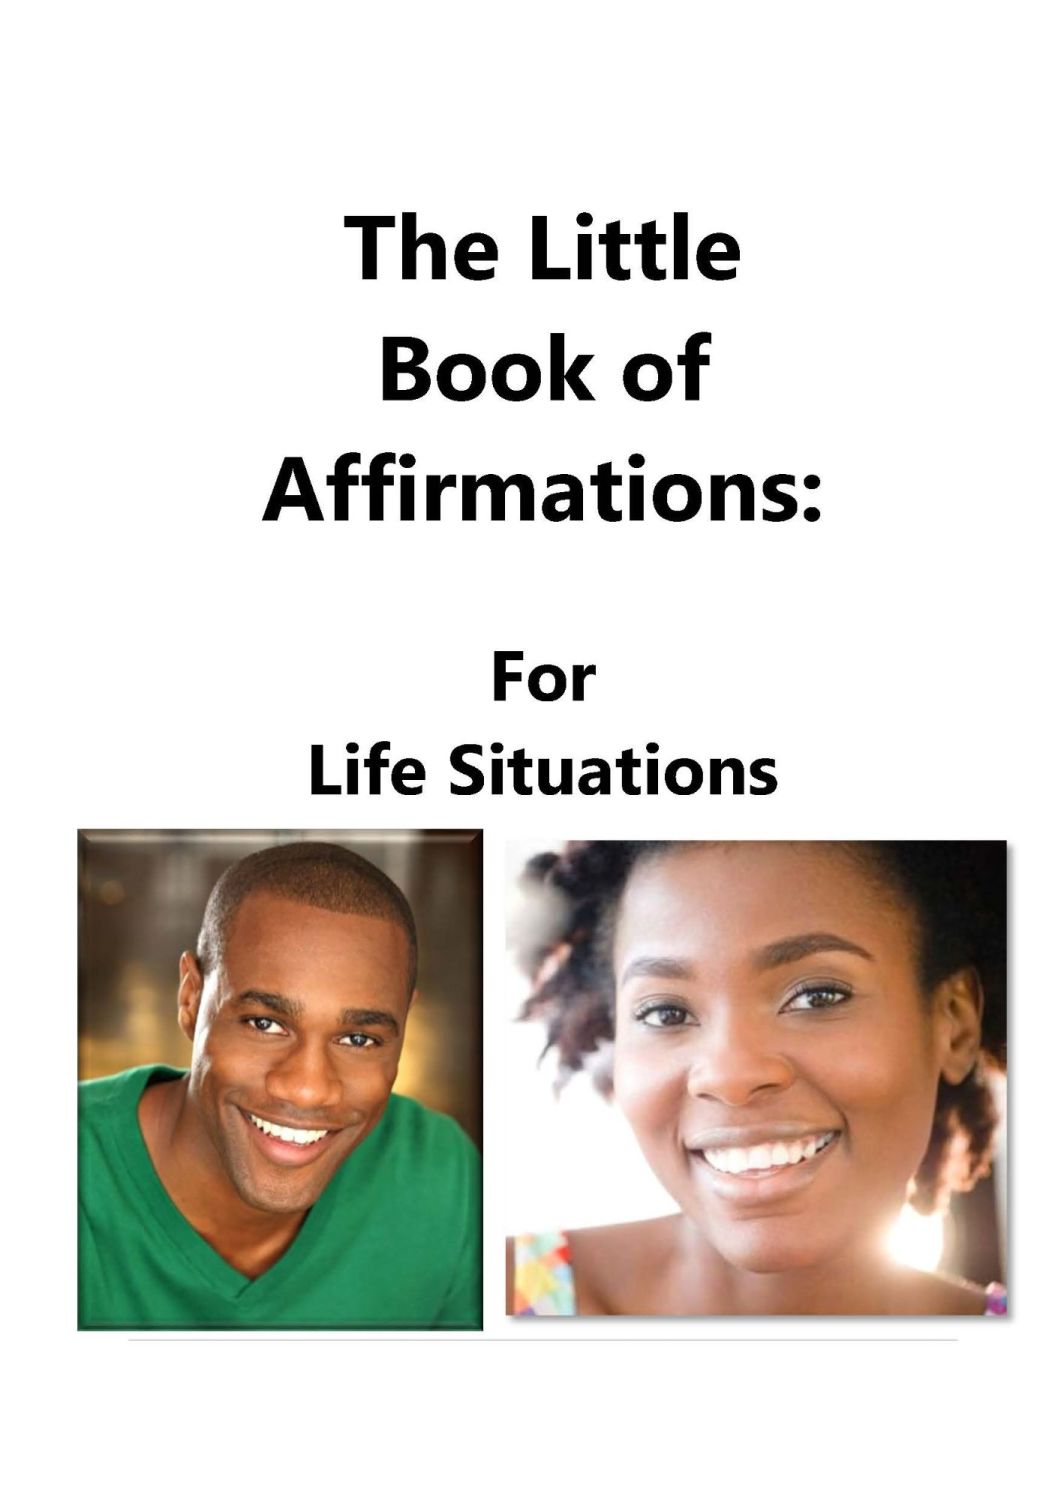 The Little Book of Affirmations - for life situations 